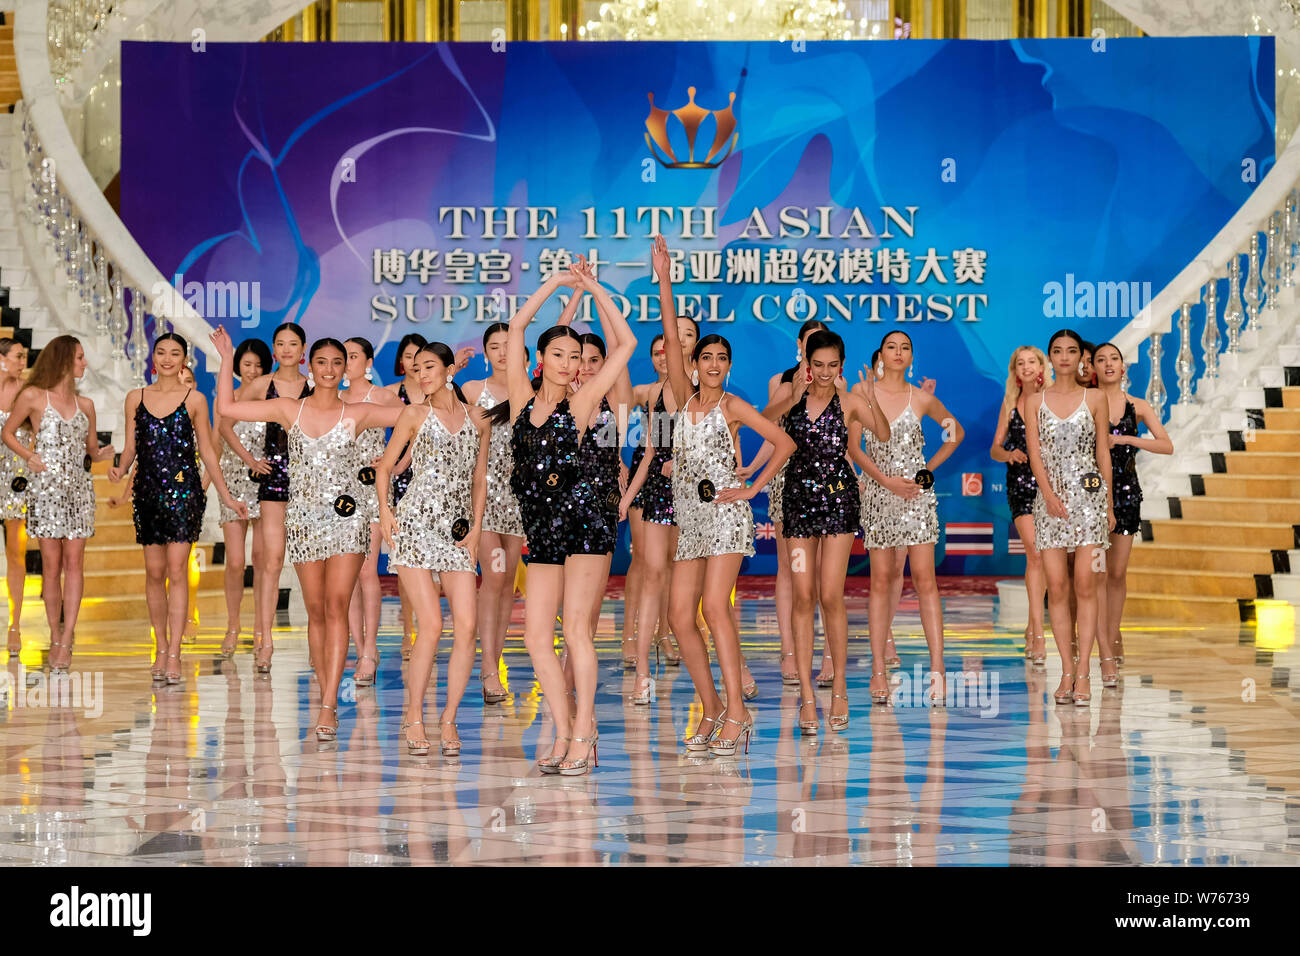 Contestants display creations during the 11th Asian Supermodel Contest at Imperial Palace in Saipan, Northern Mariana Islands, 16 December 2017.   A t Stock Photo